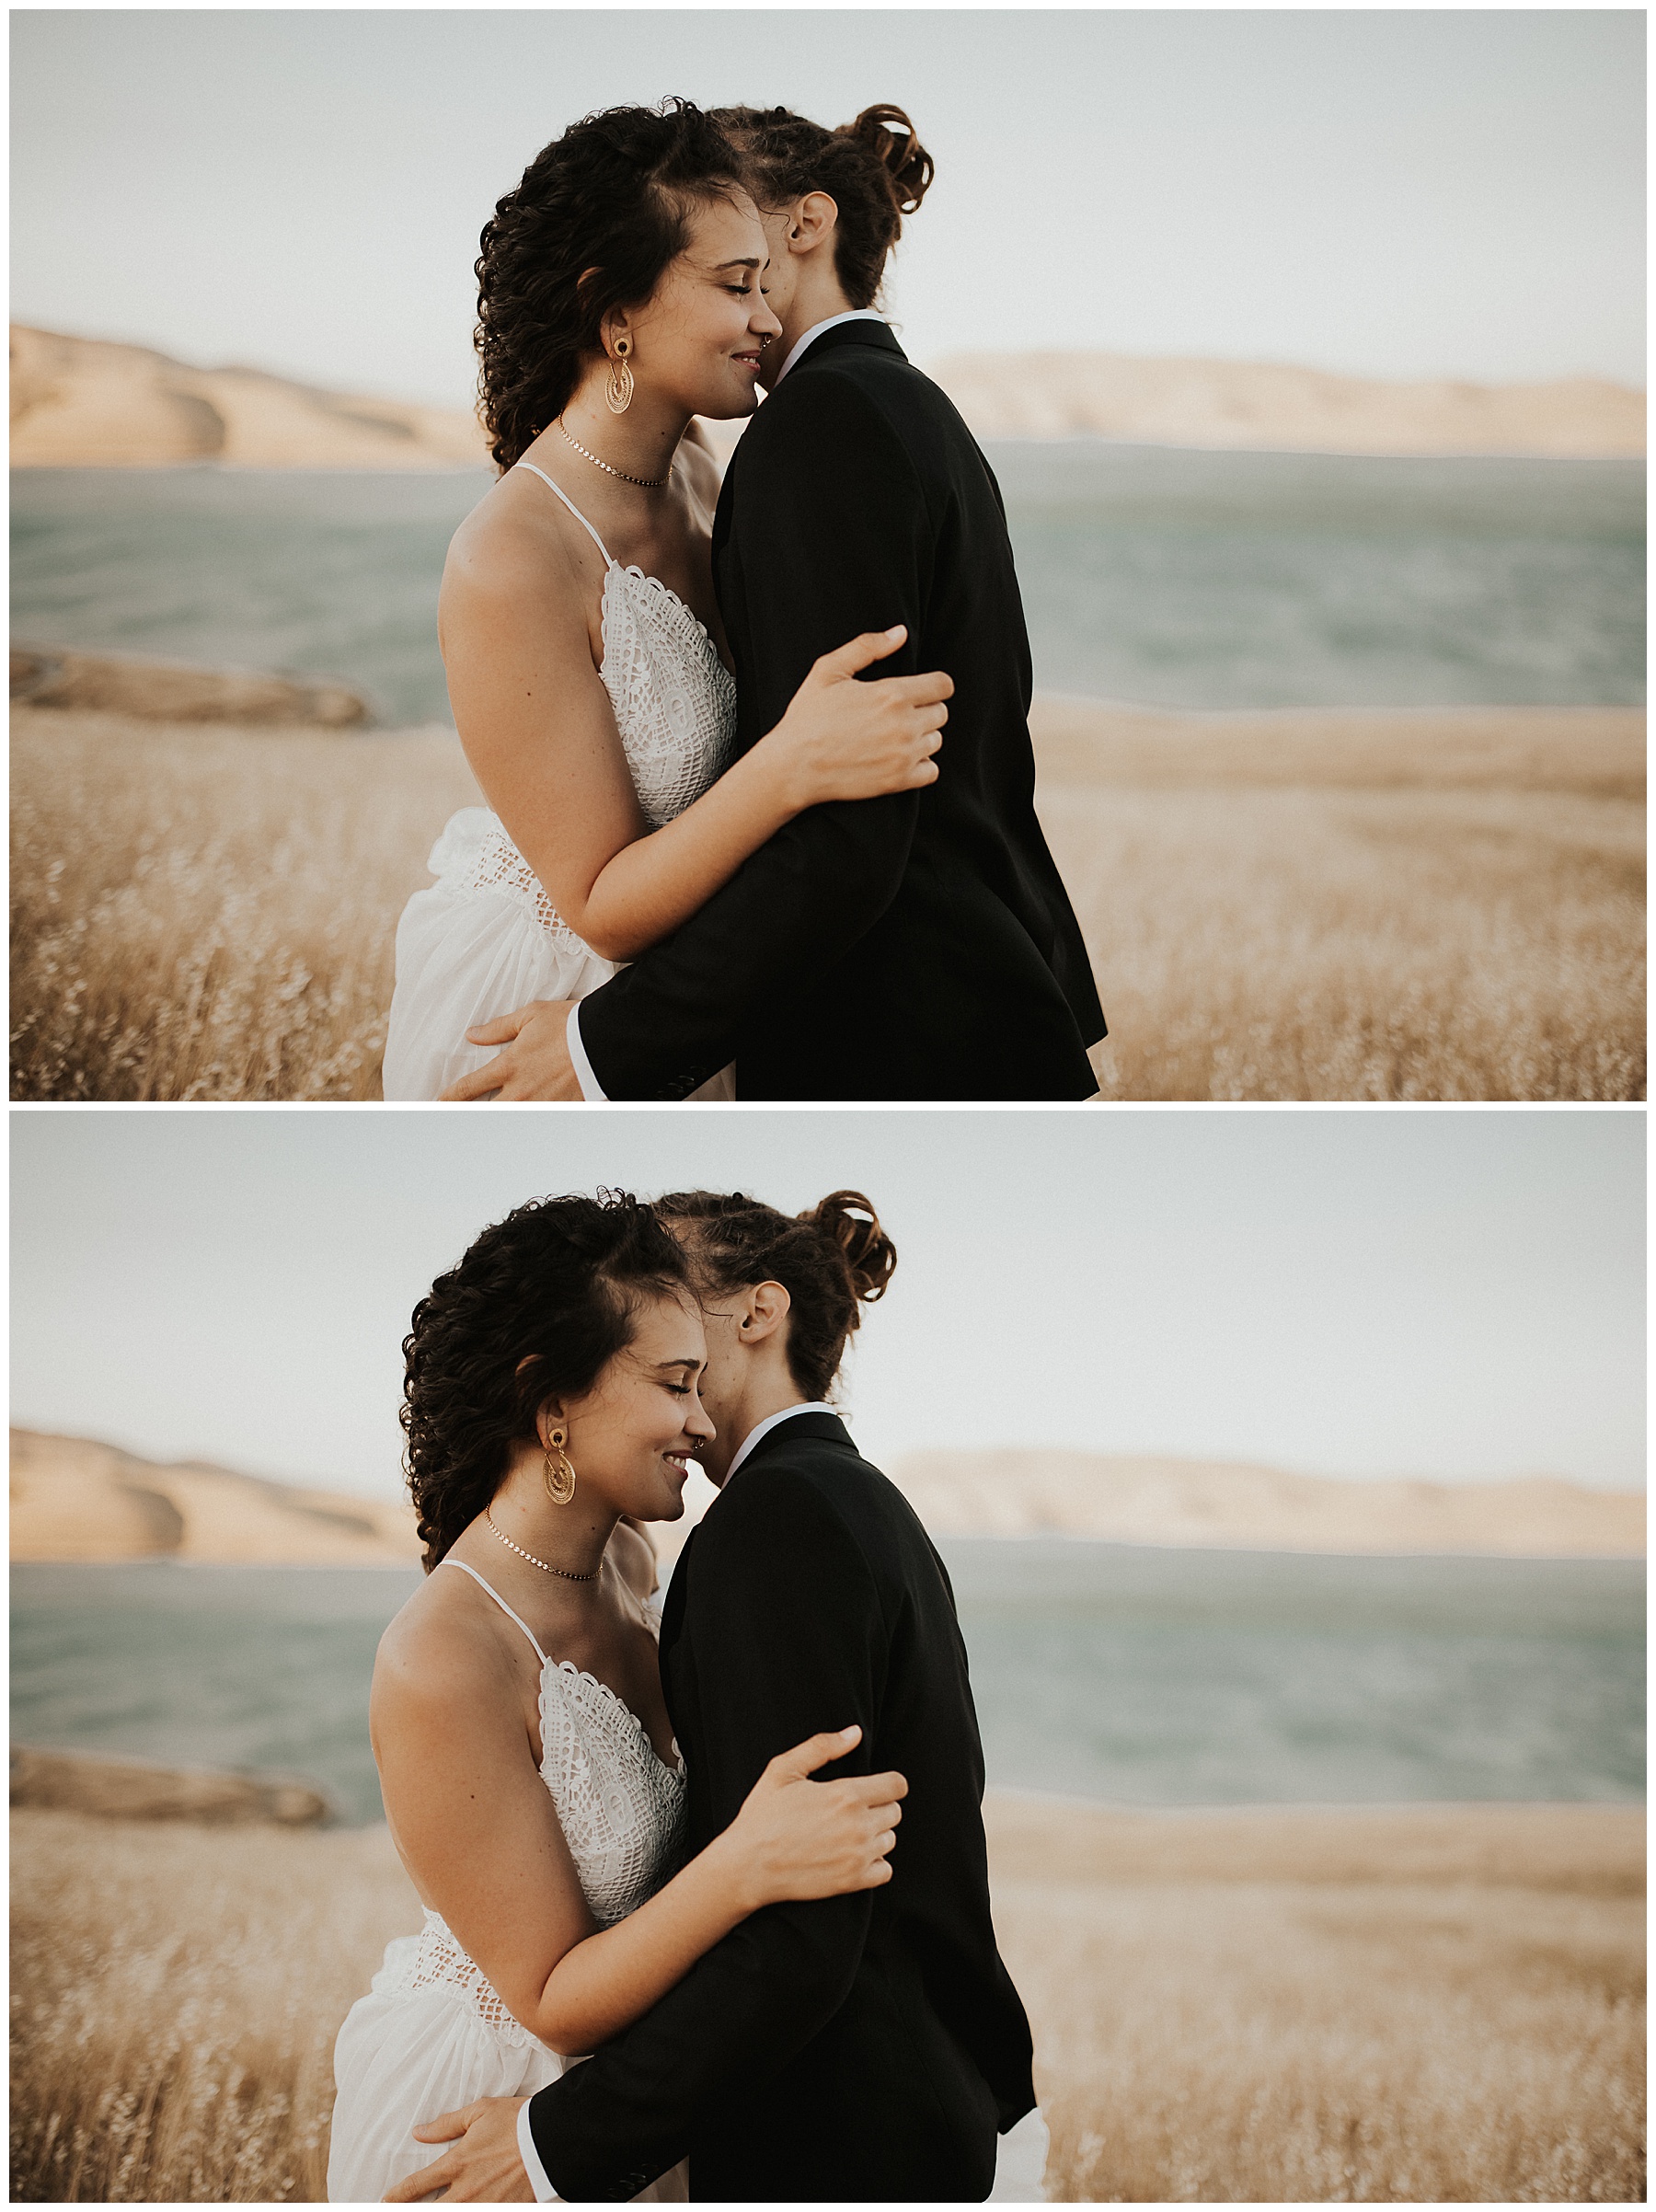 Giselle and Andre’s bohemian elopement at Los Vaqueros, California - Photographed by Juju Photography - California and destination wedding photographer